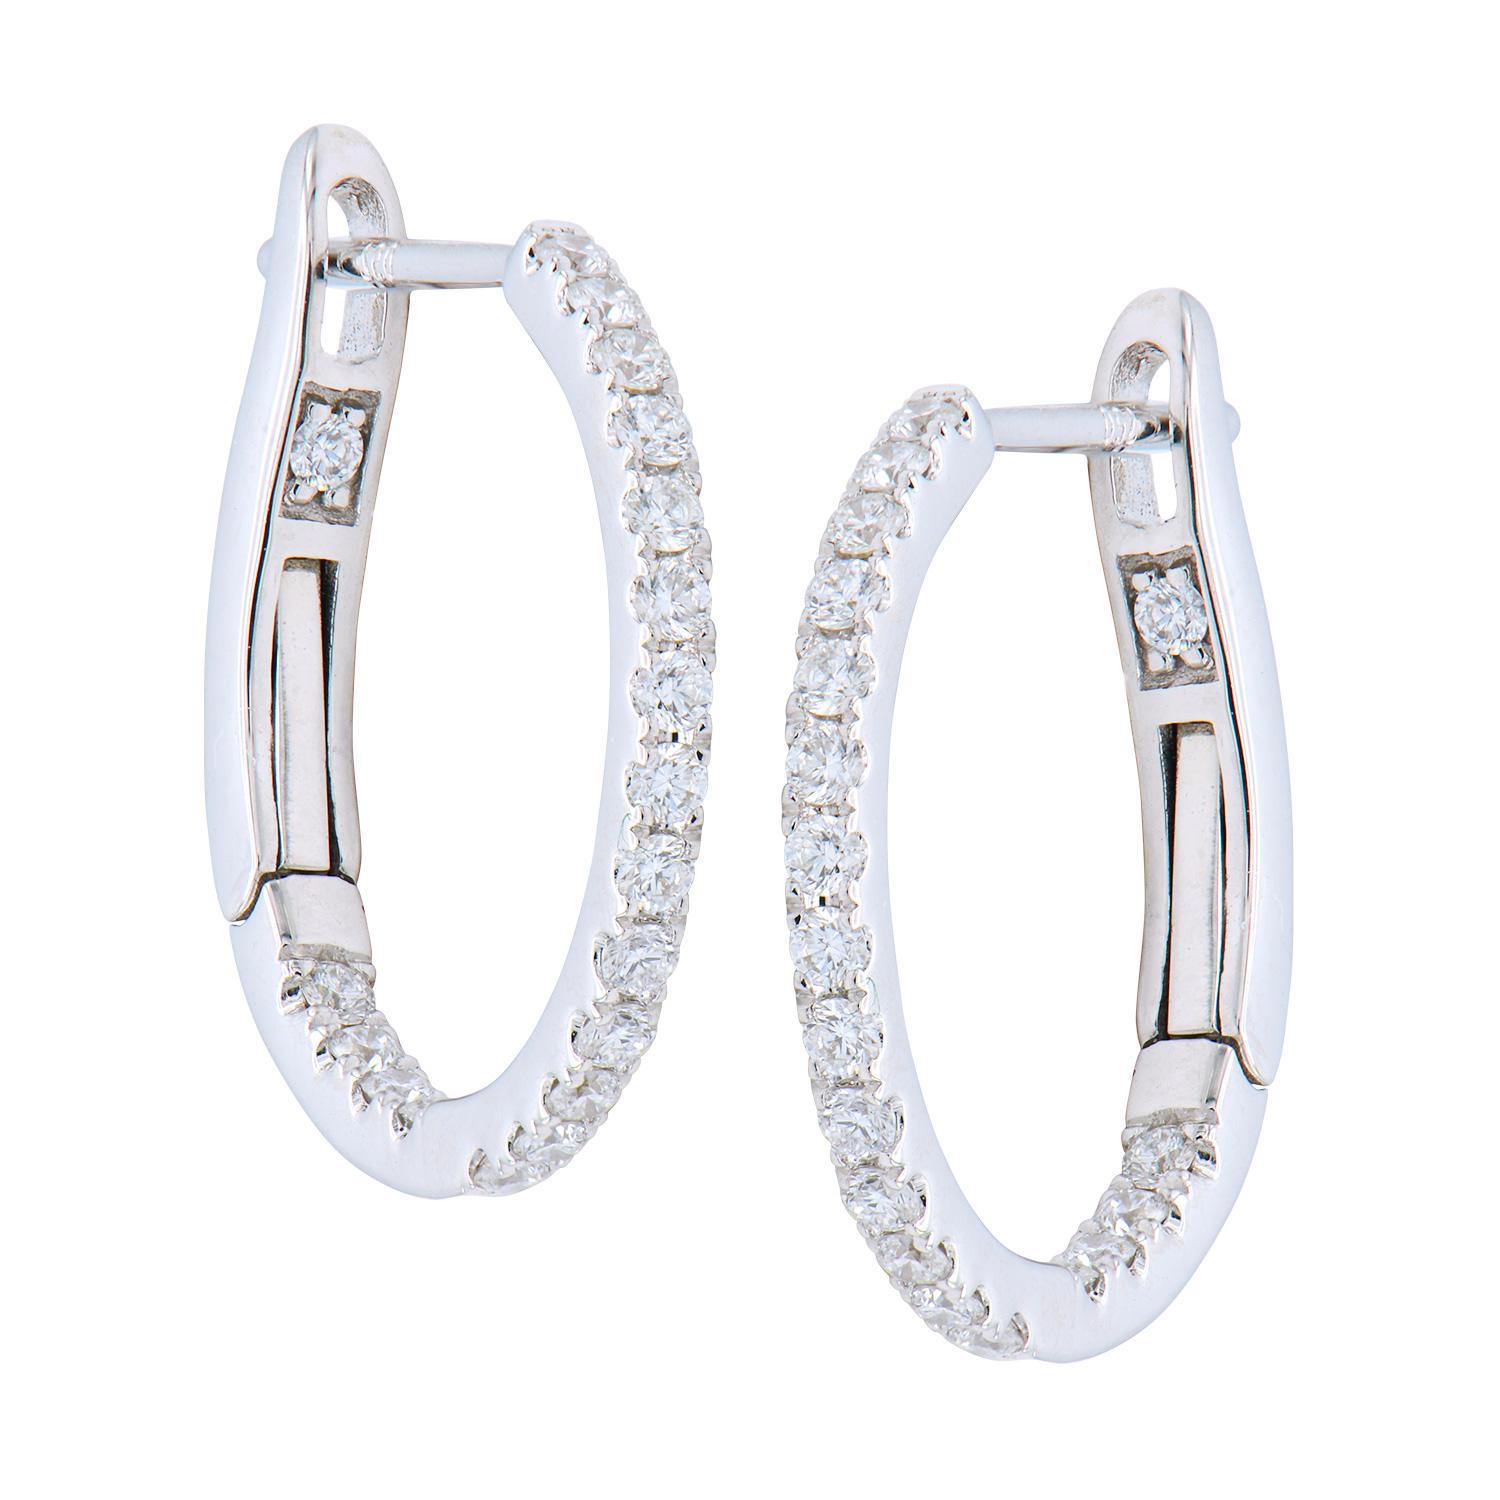 These classic and timeless small hoop earrings are made from 2.3 grams of 18 karat white gold. There are 38 round VS2, G color diamonds set in them totaling 0.31 carats. These hoops have a lever back for easy and secure wear. 